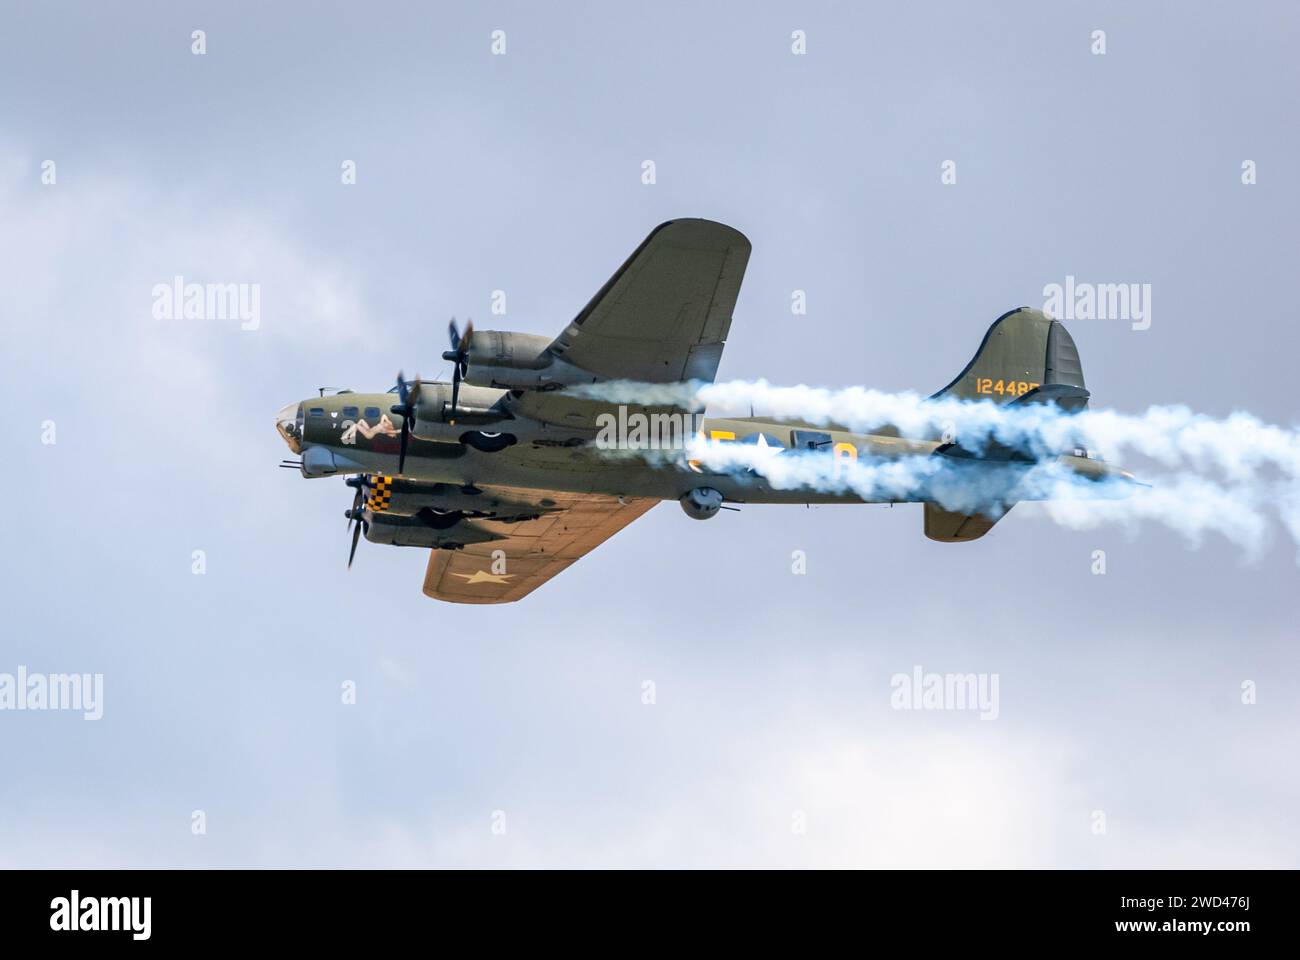 Boeing B-17G Flying Fortress '124485' WW2 Bomber plane representing the famous 'Memphis Belle' flying in the sky Stock Photo